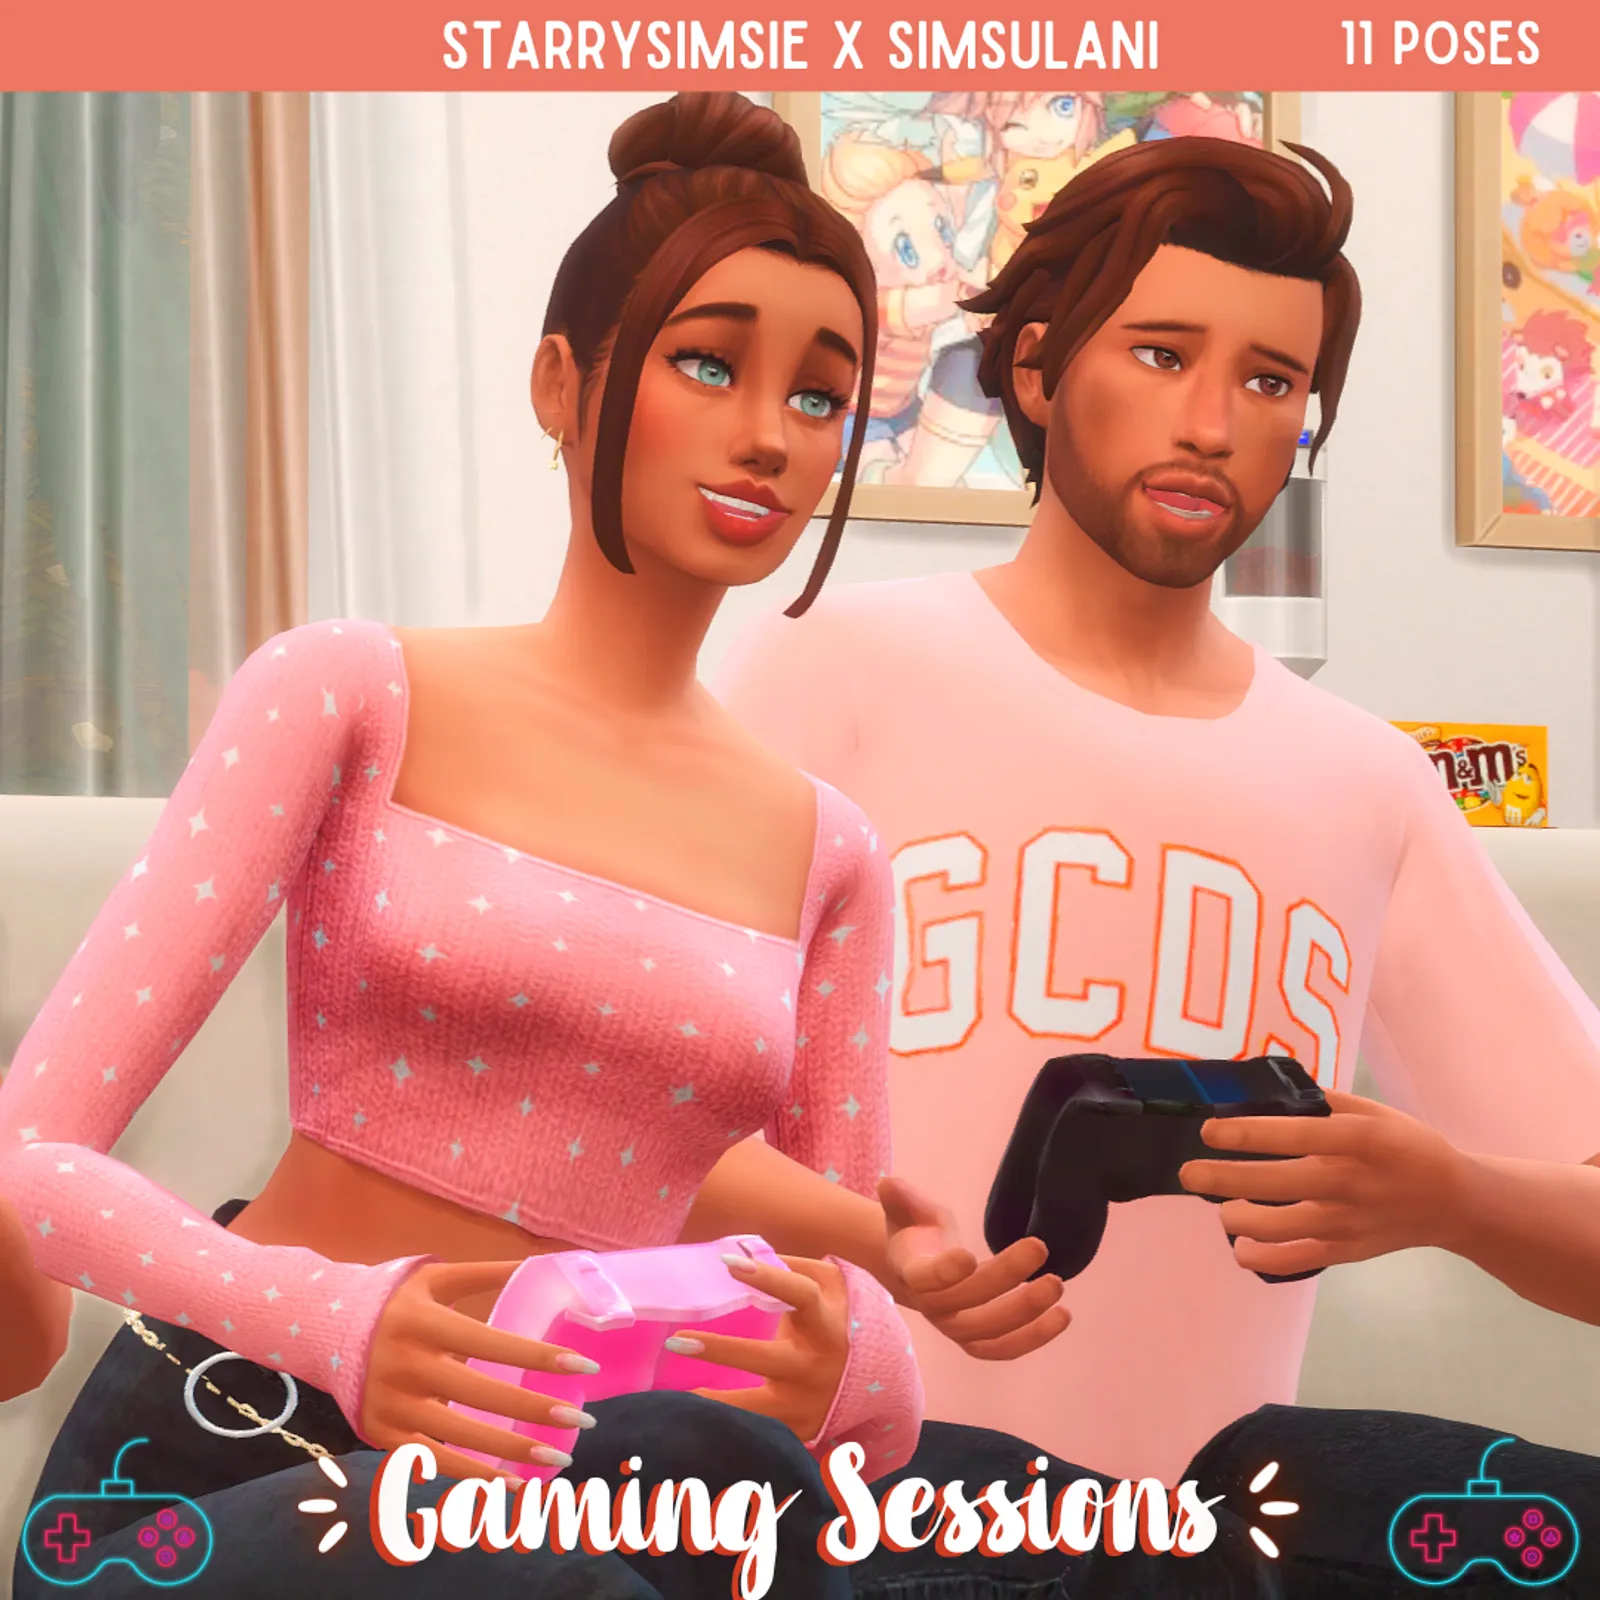 Starrysimsie x Simsulani - Gaming Sessions ?